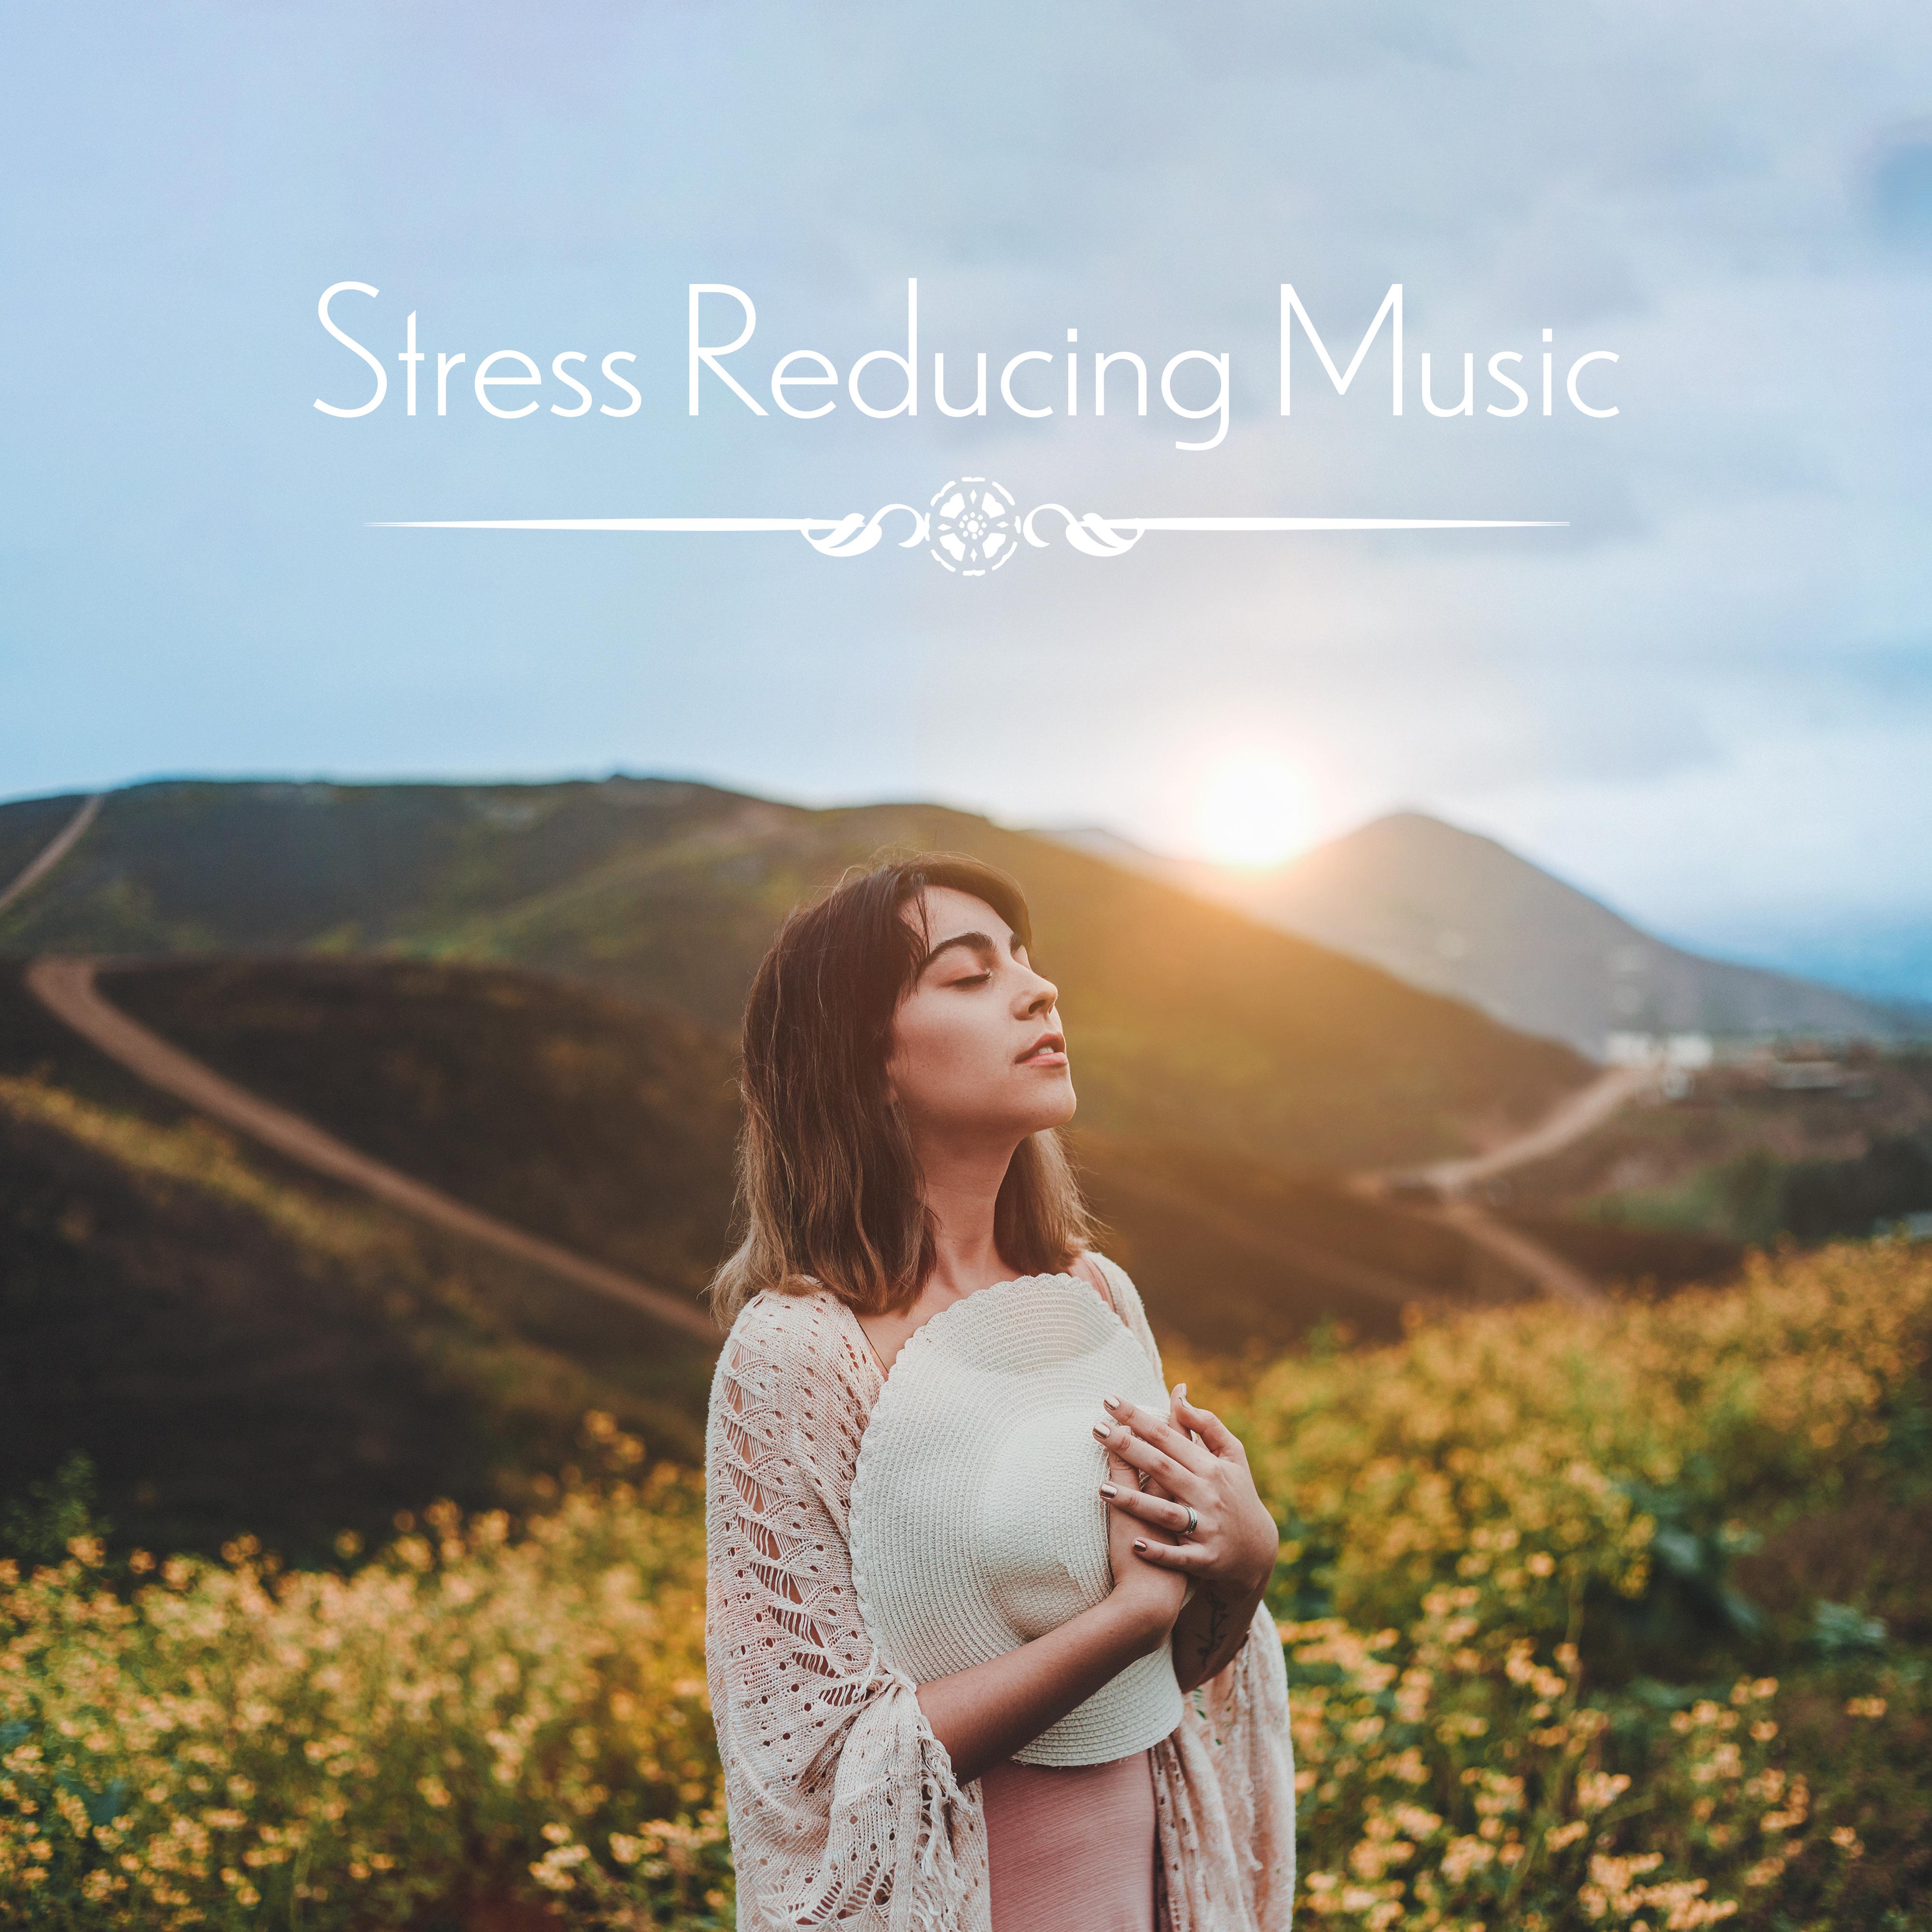 Stress Reducing Music - 15 tracks that'll help You Calm Down, Relieve Stress and Tension, Anger and Negative Emotions, will let You Relax and Unwind